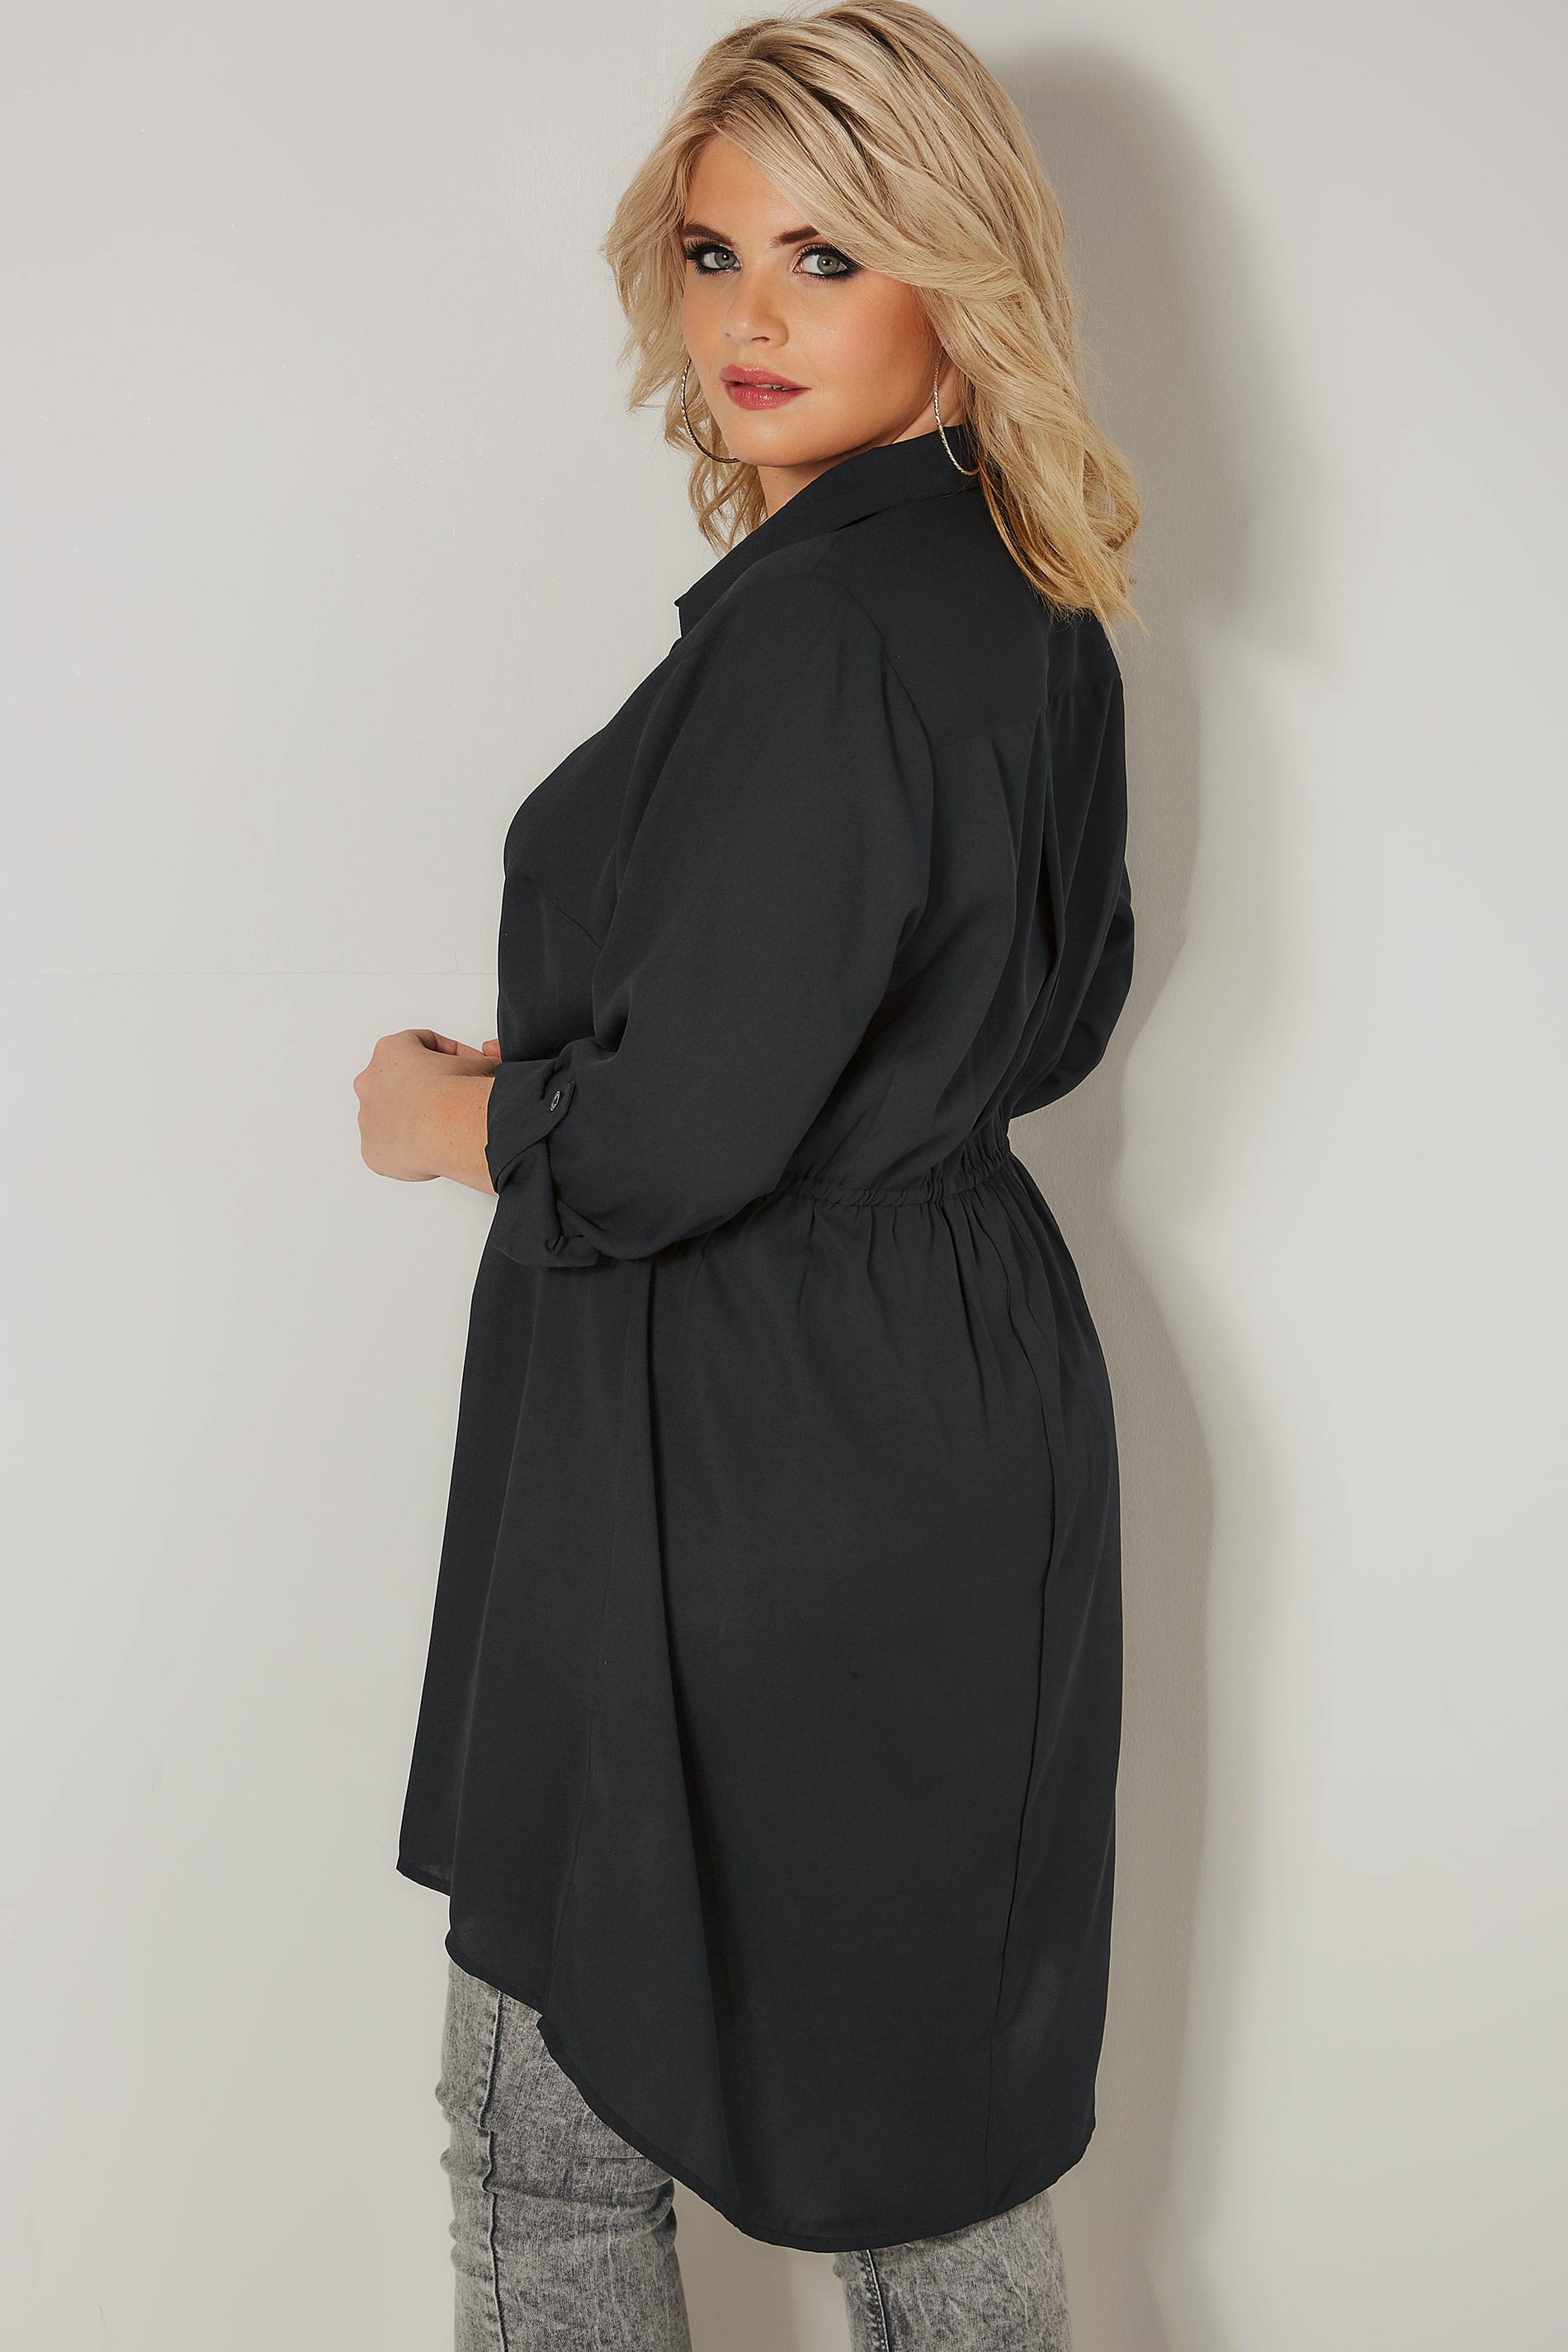 longline icollections plus size